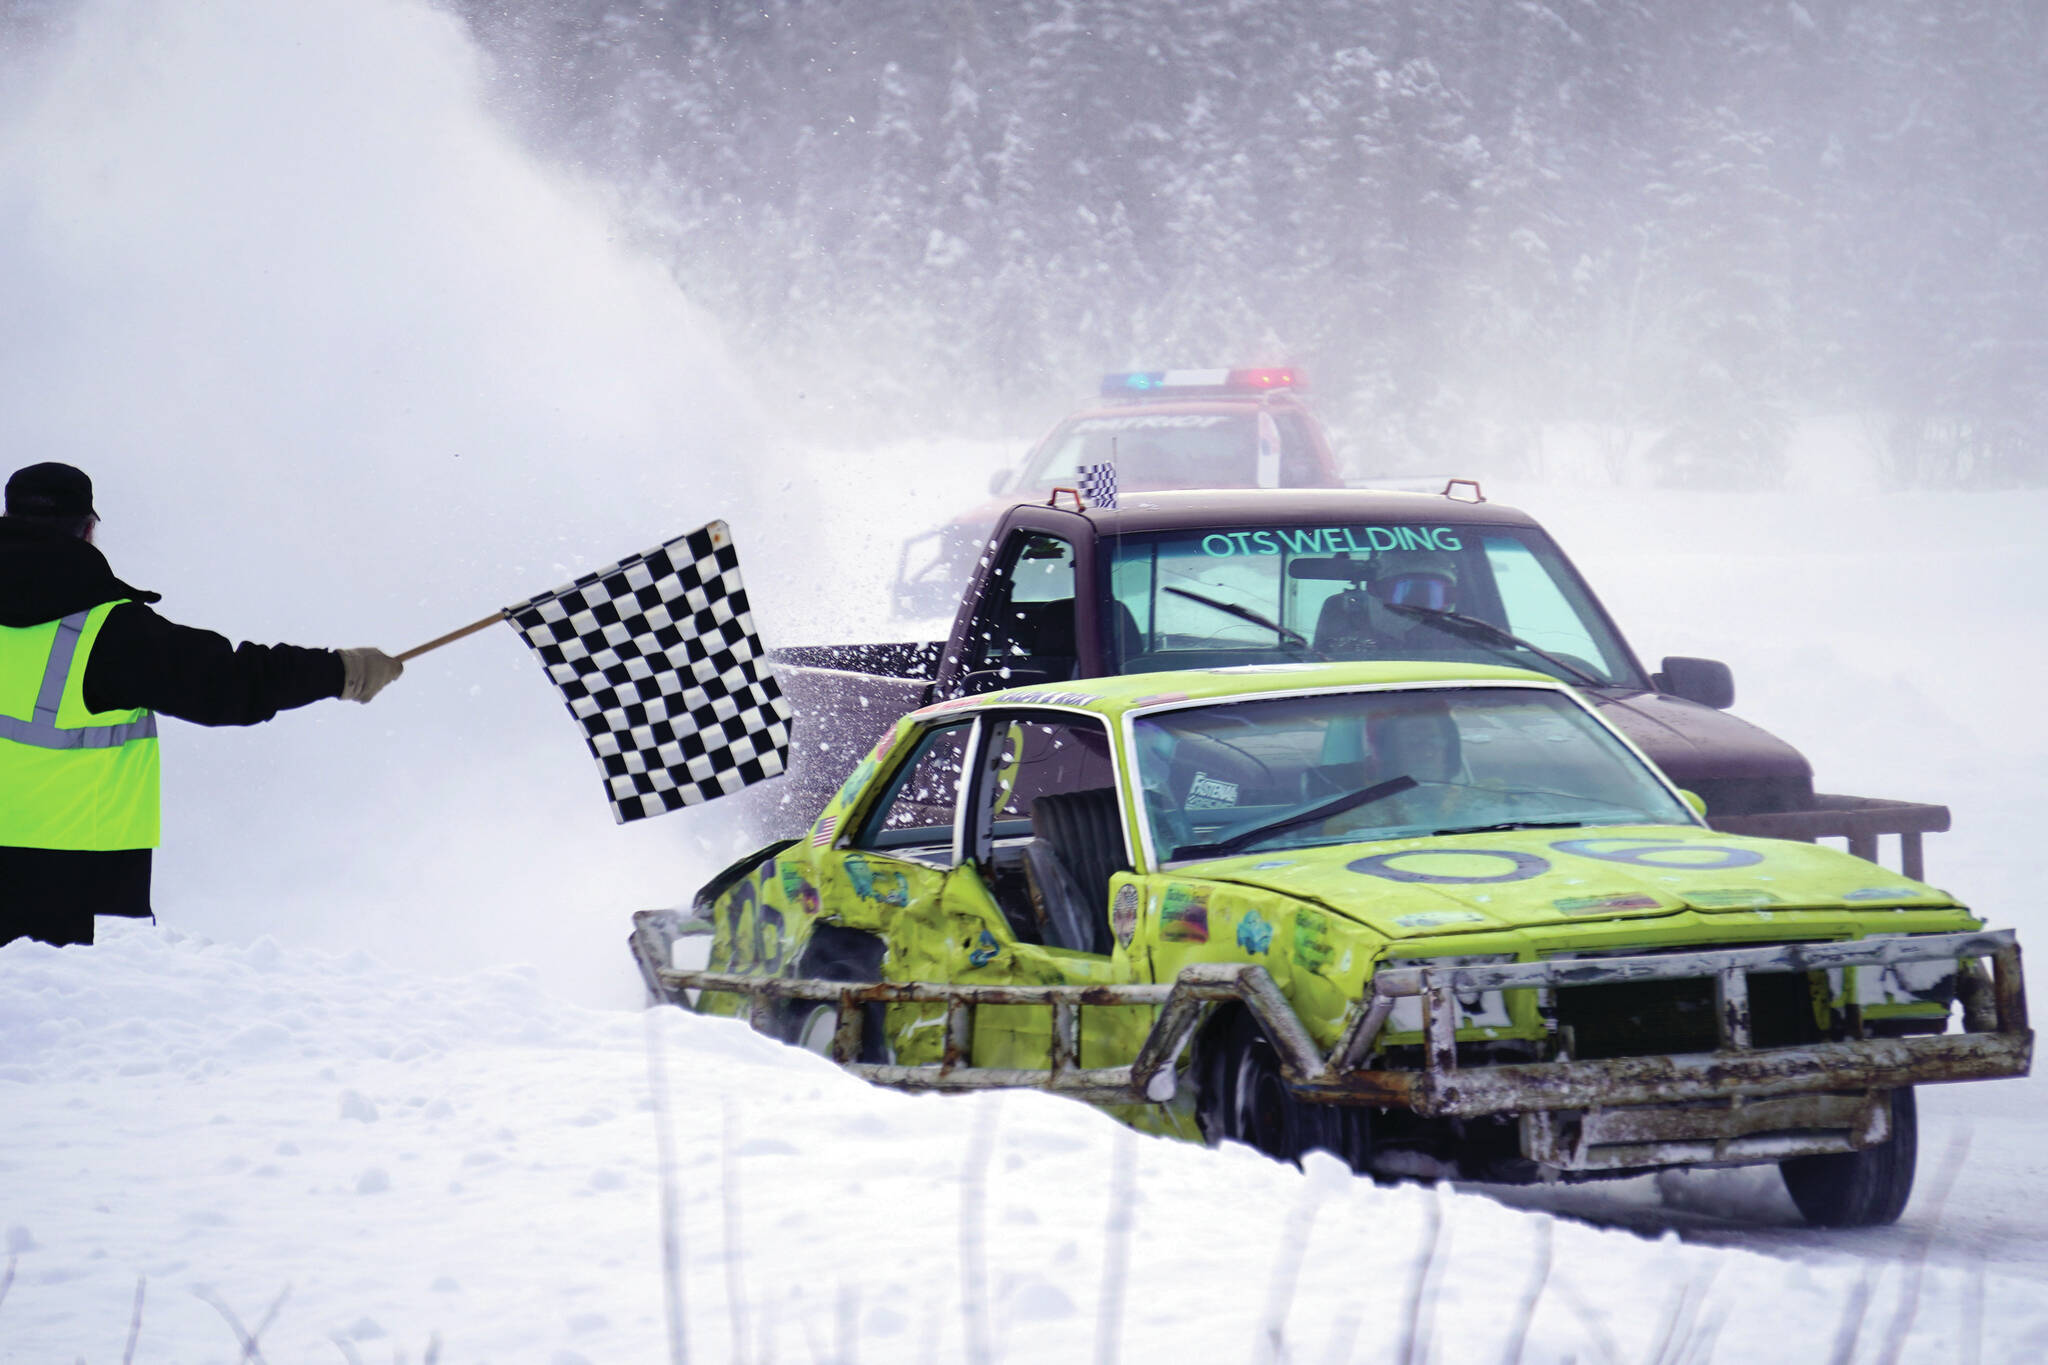 Ralph Mills clears the finish line in first place during the Men’s Main Event race as part of Kenai Peninsula Ice Racing at the Decanter Inn in Kasilof on Sunday. (Jake Dye/Peninsula Clarion)